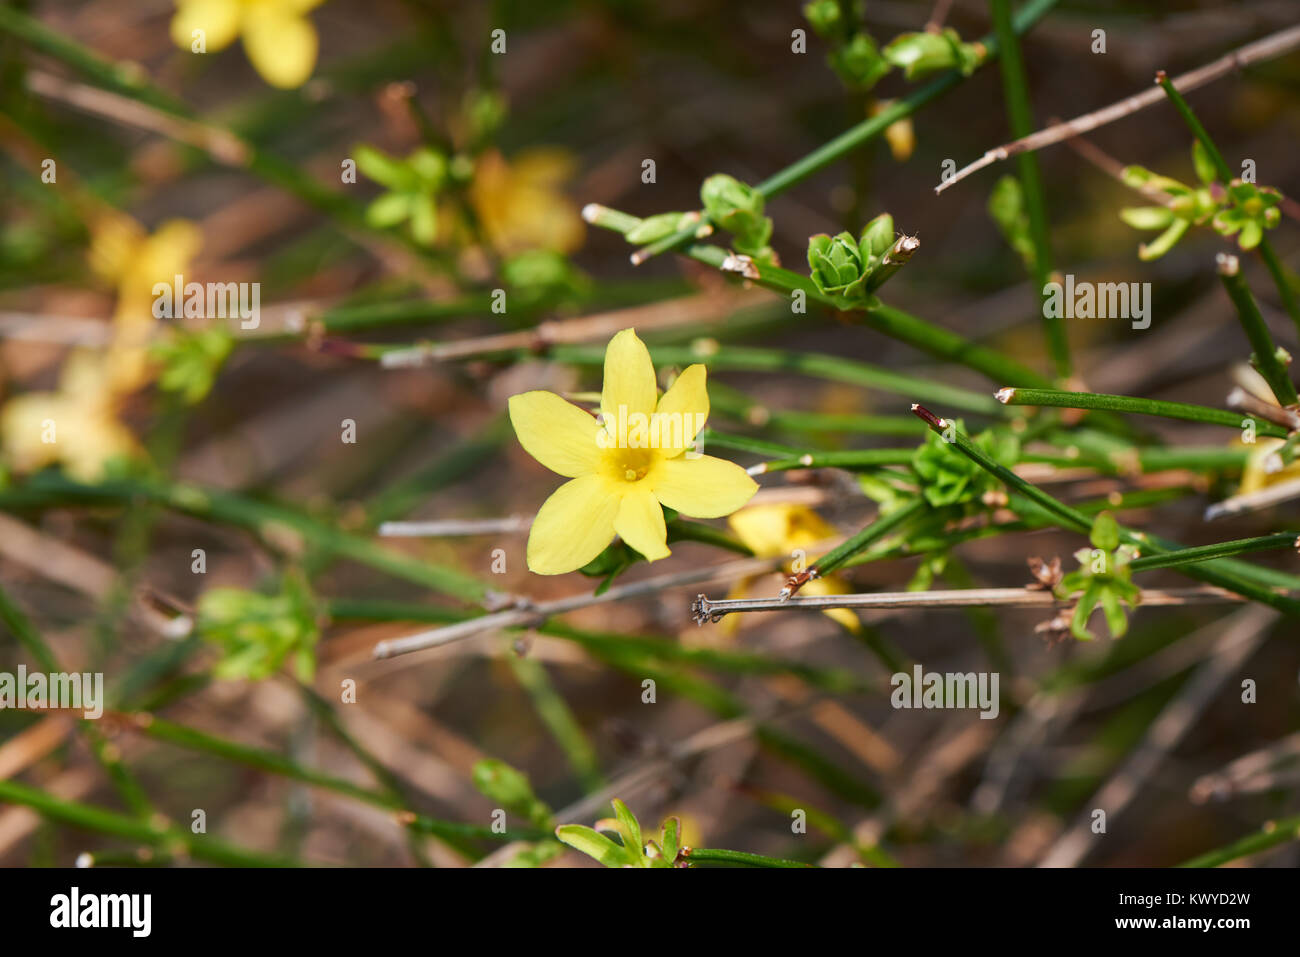 The Winter Jasmine (Jasminum nudiflorum Lindl.). It is native to China and is planted for ornamental purposes in the south of central China. Stock Photo